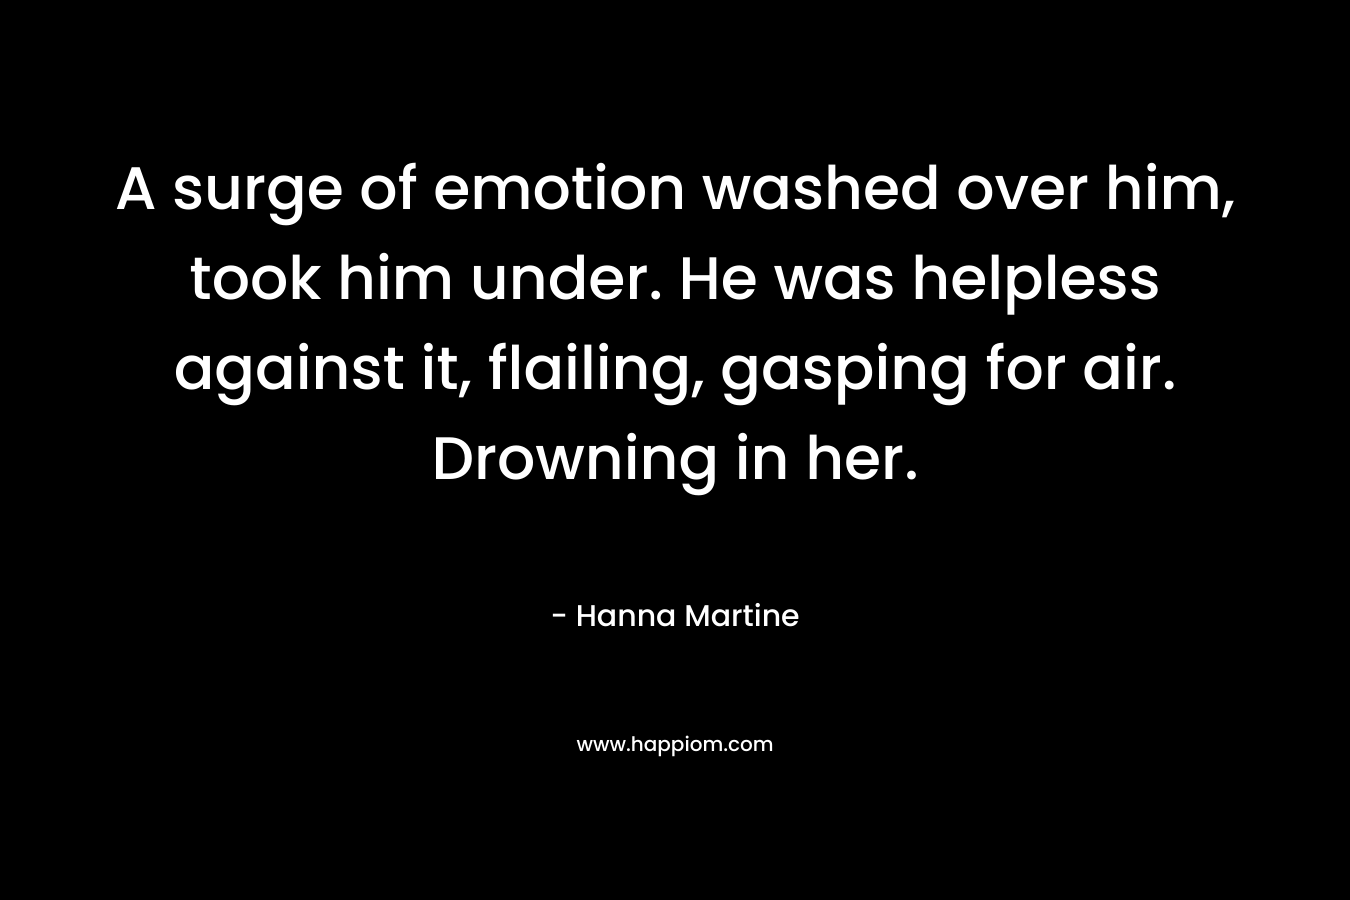 A surge of emotion washed over him, took him under. He was helpless against it, flailing, gasping for air. Drowning in her. – Hanna Martine